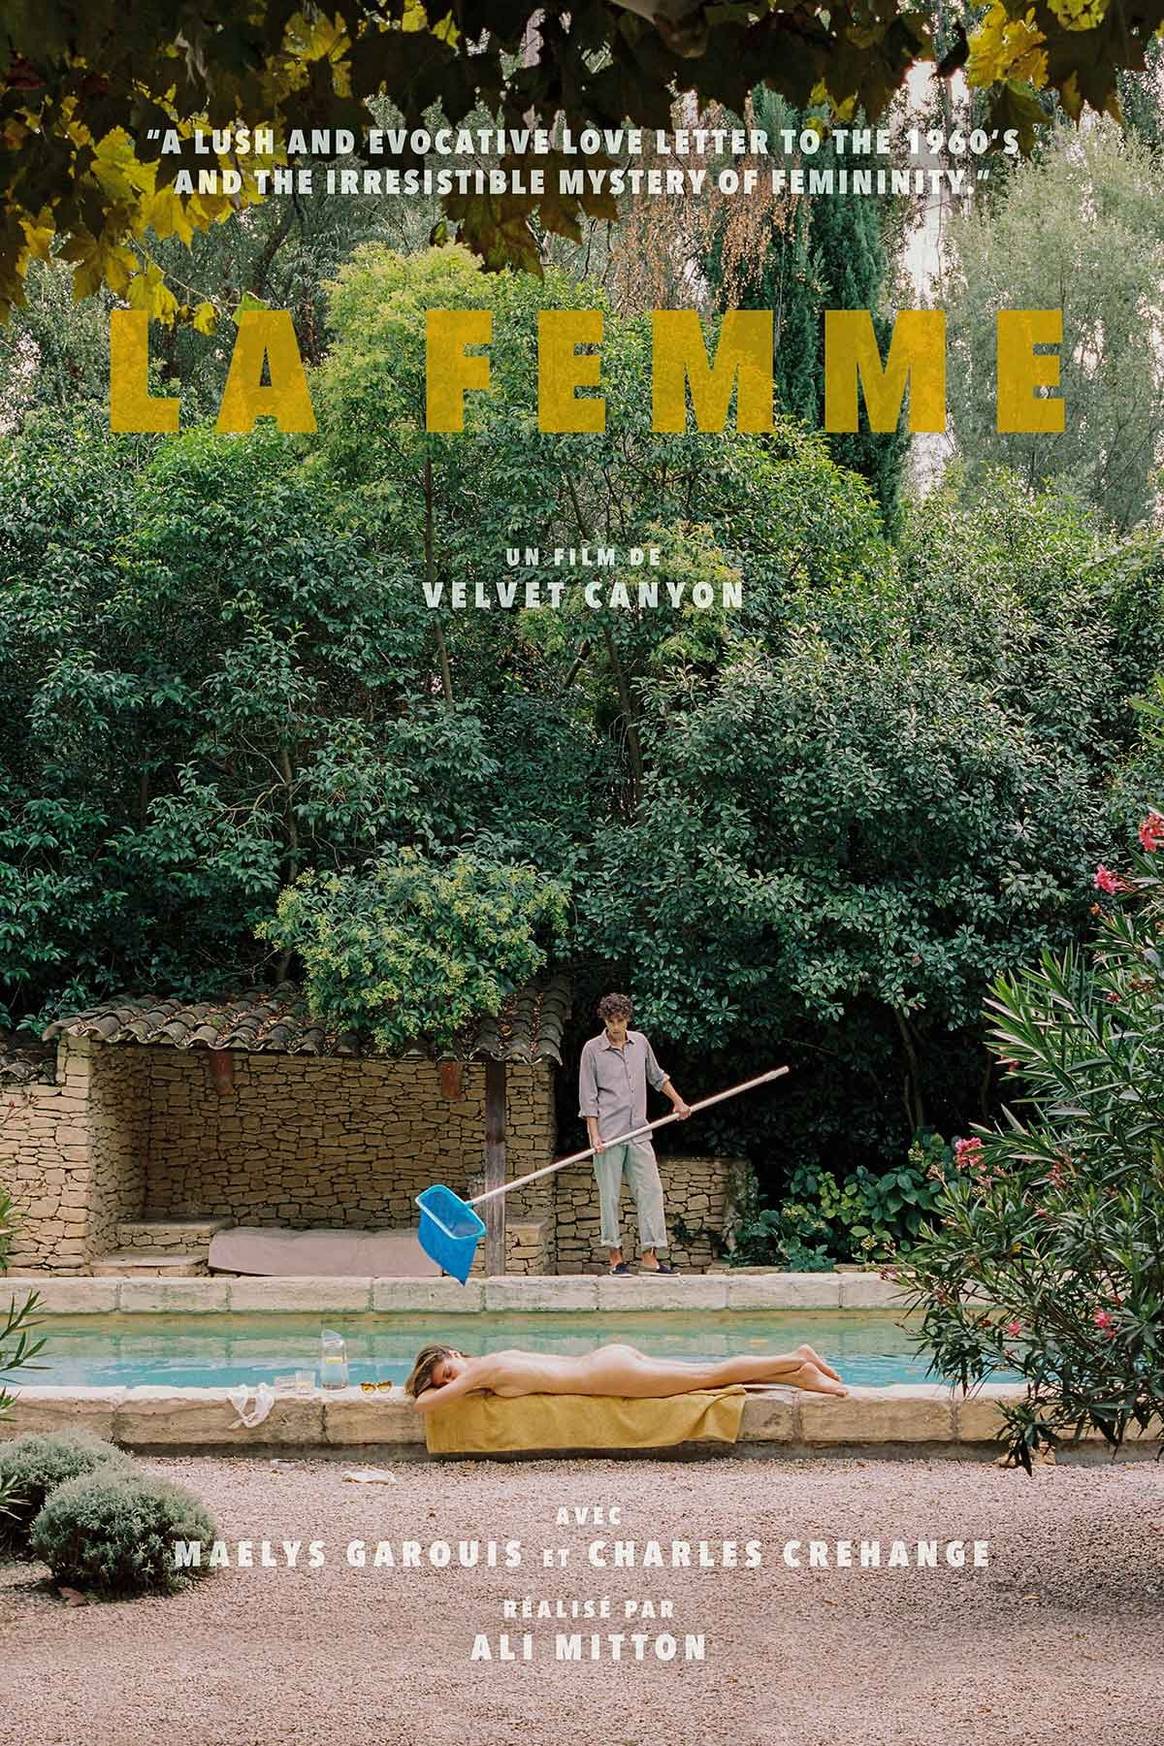 How eyewear label Velvet Canyon explores its brand in the world of film with 'La Femme'